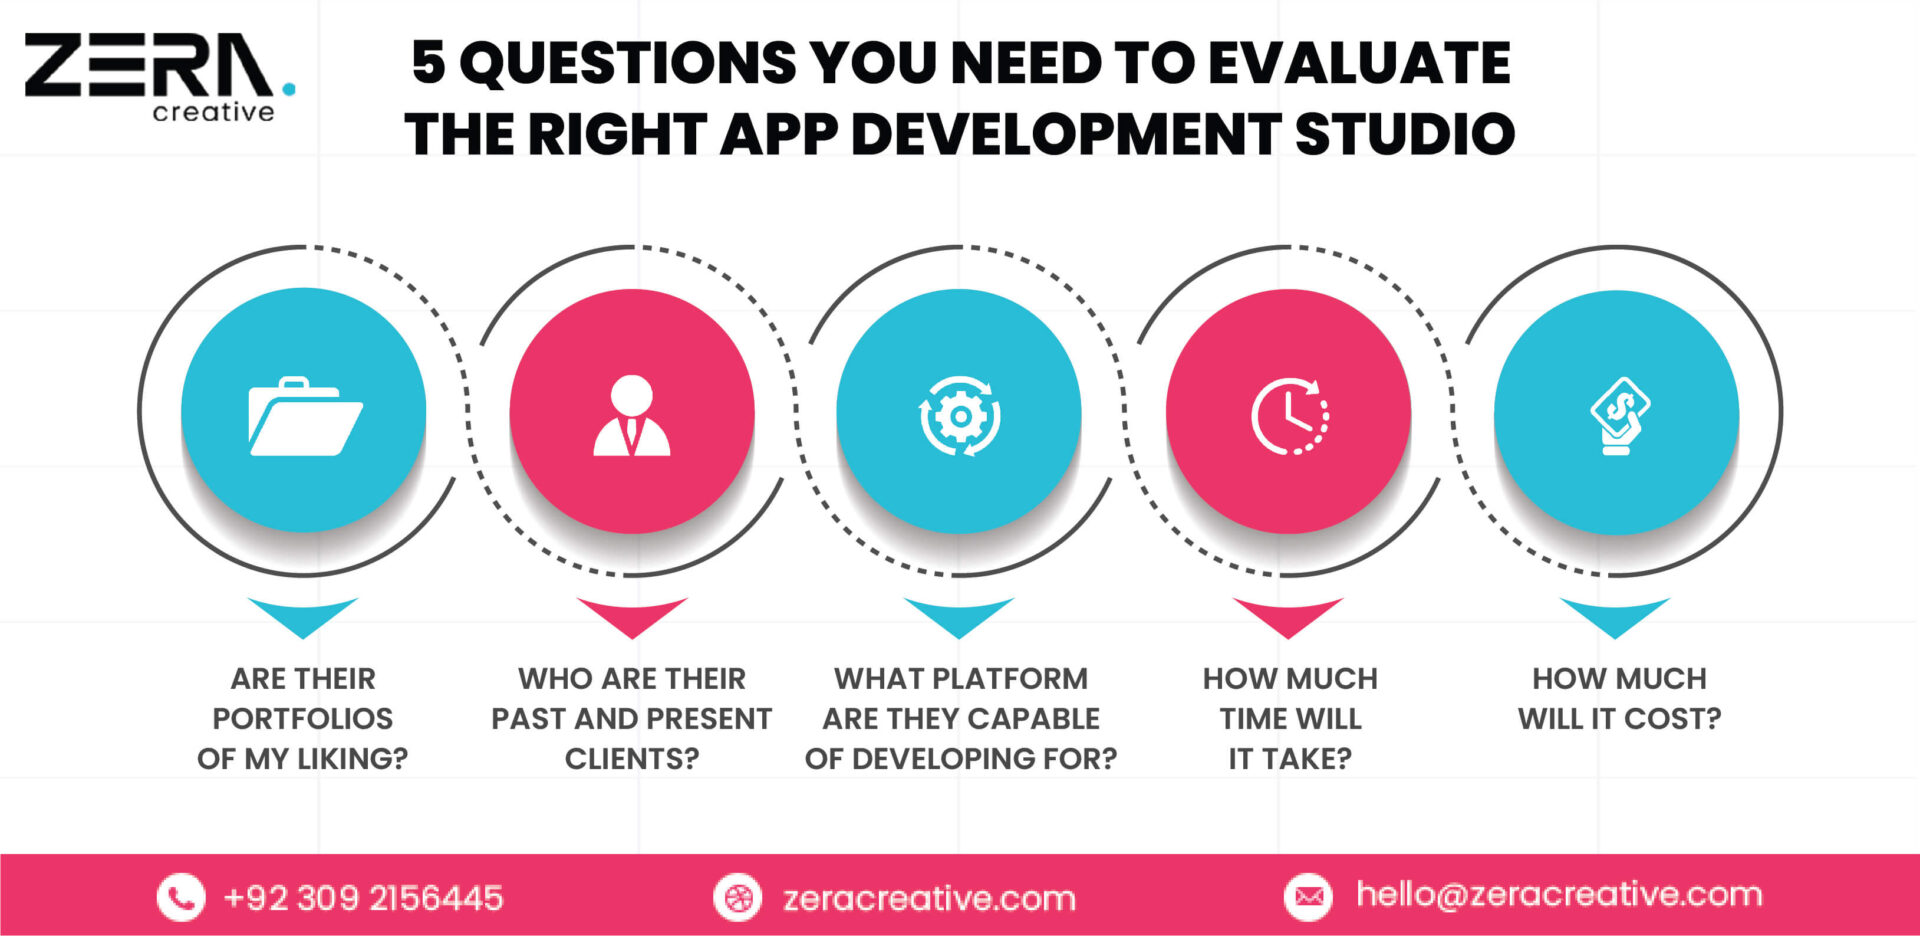 5 Questions You Need To Evaluate the Right App Development Studio - infographic 10 scaled - Zera Creative